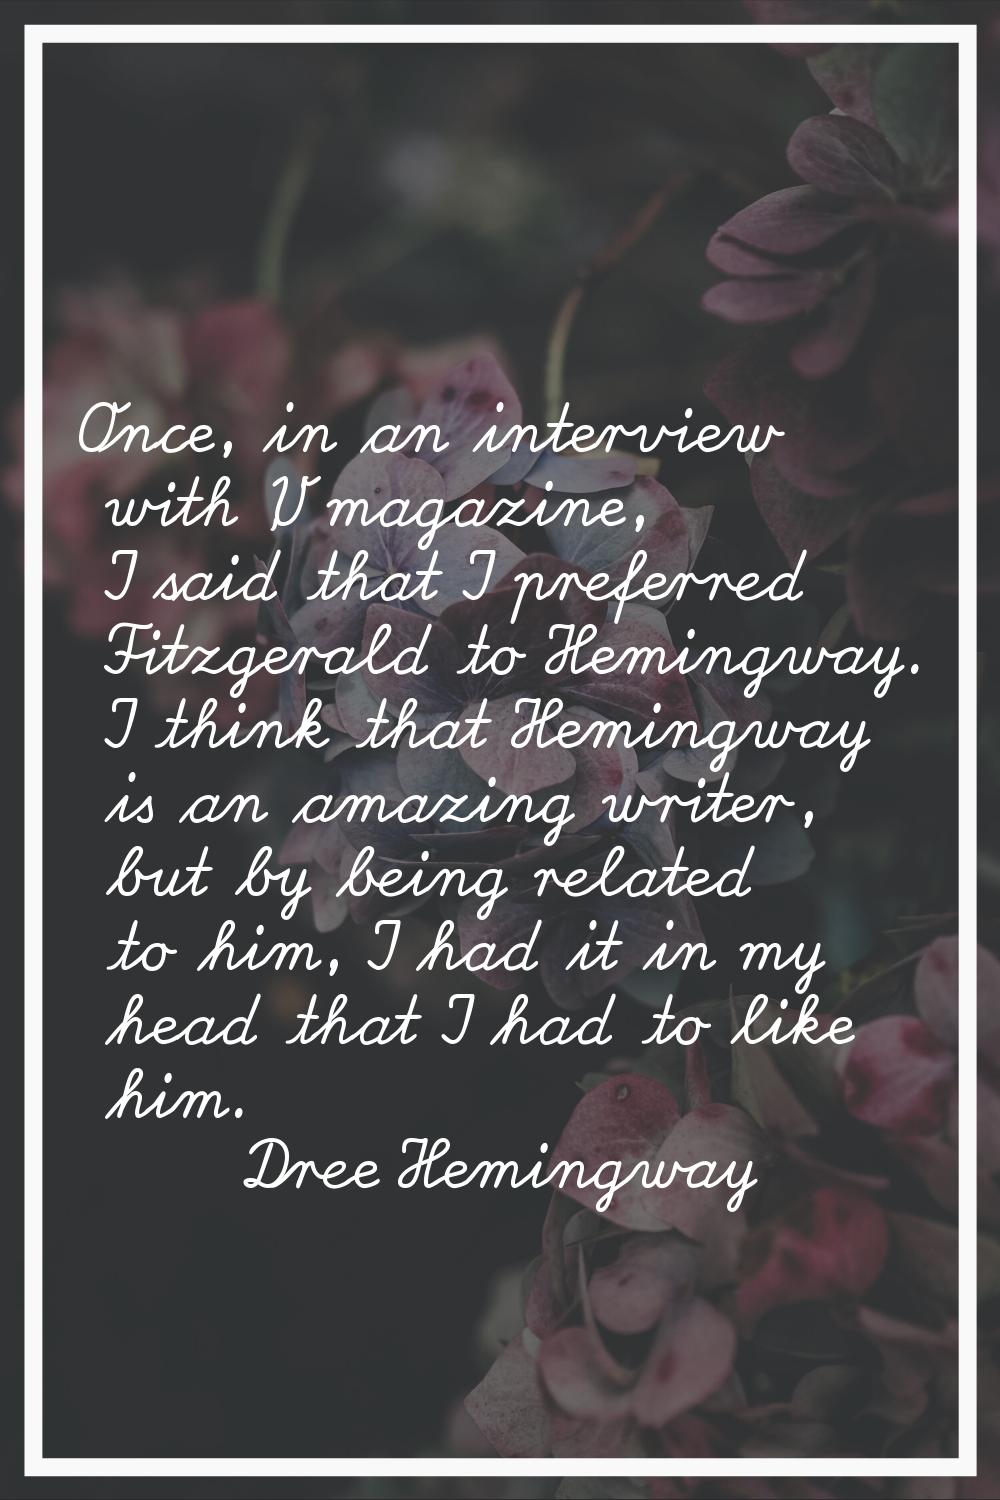 Once, in an interview with 'V' magazine, I said that I preferred Fitzgerald to Hemingway. I think t